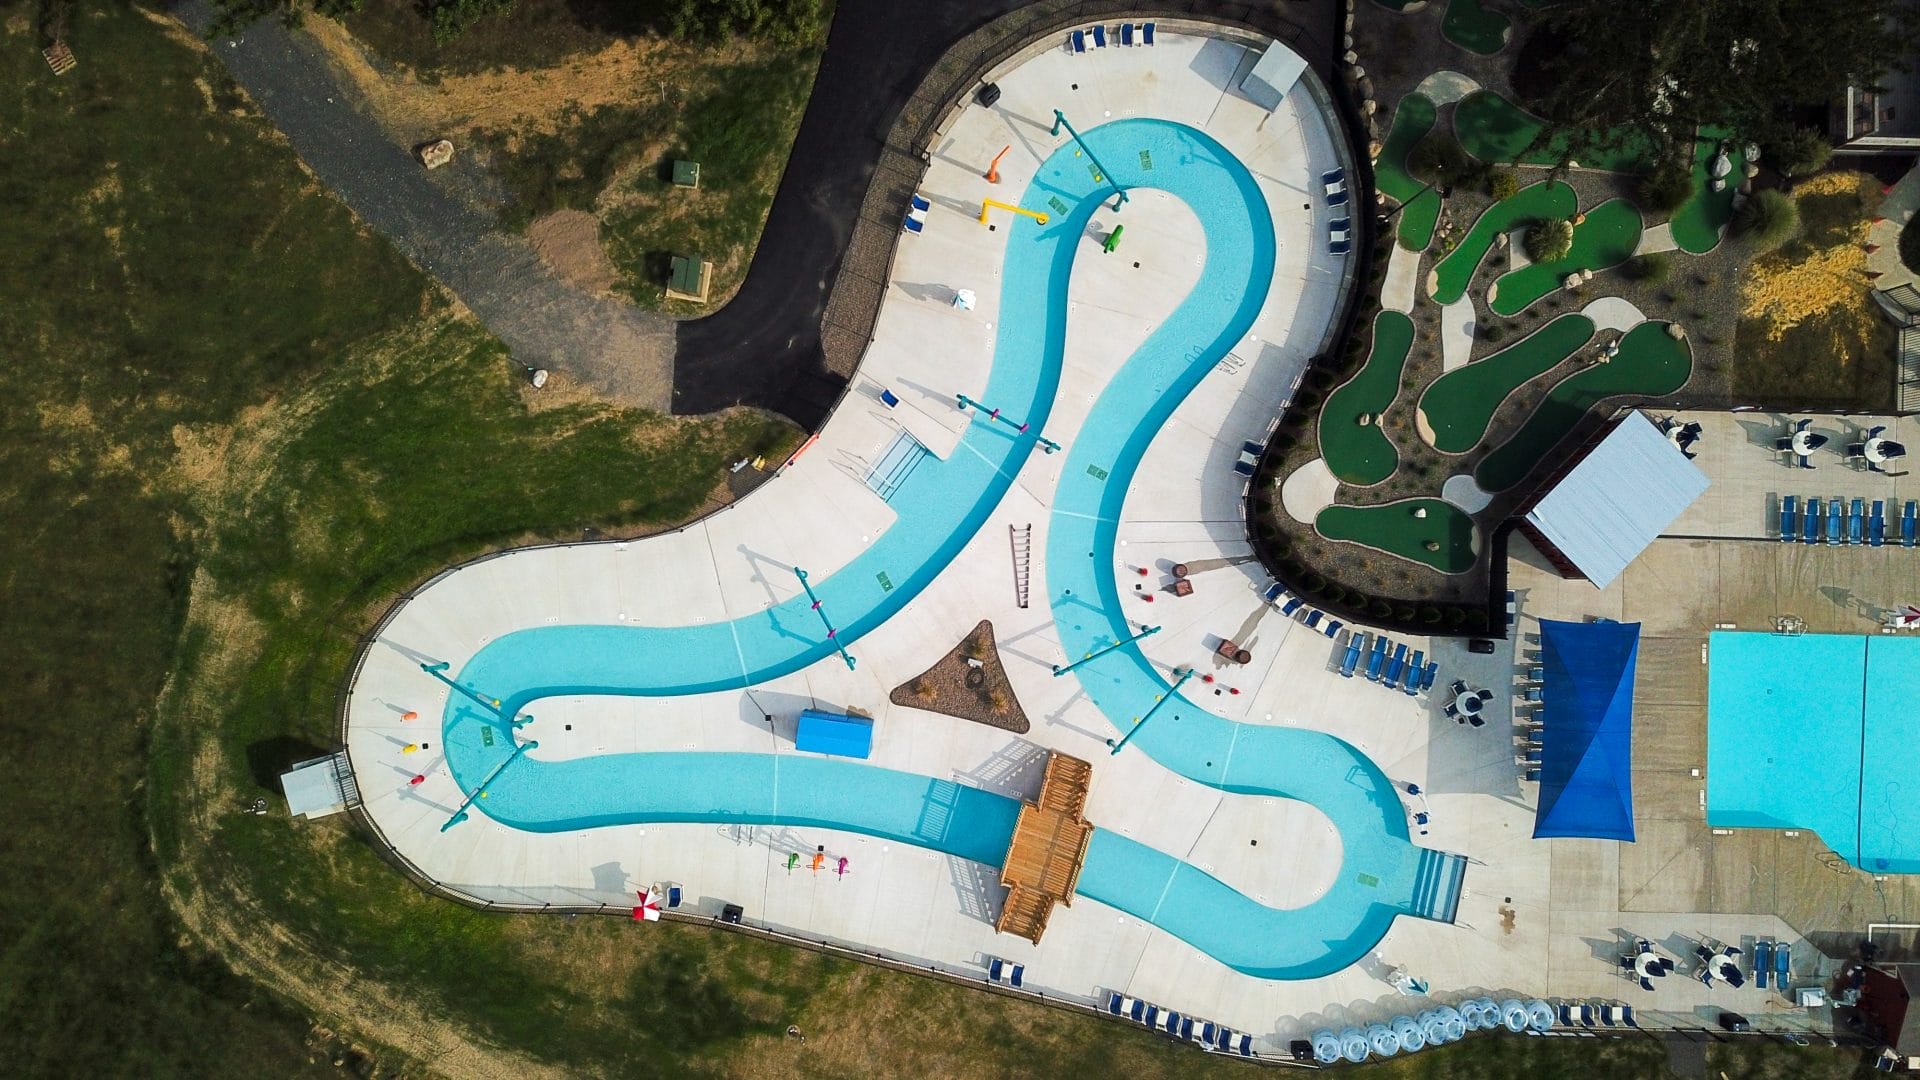 Arial drone shot of the lazy river in Gardiner, New York